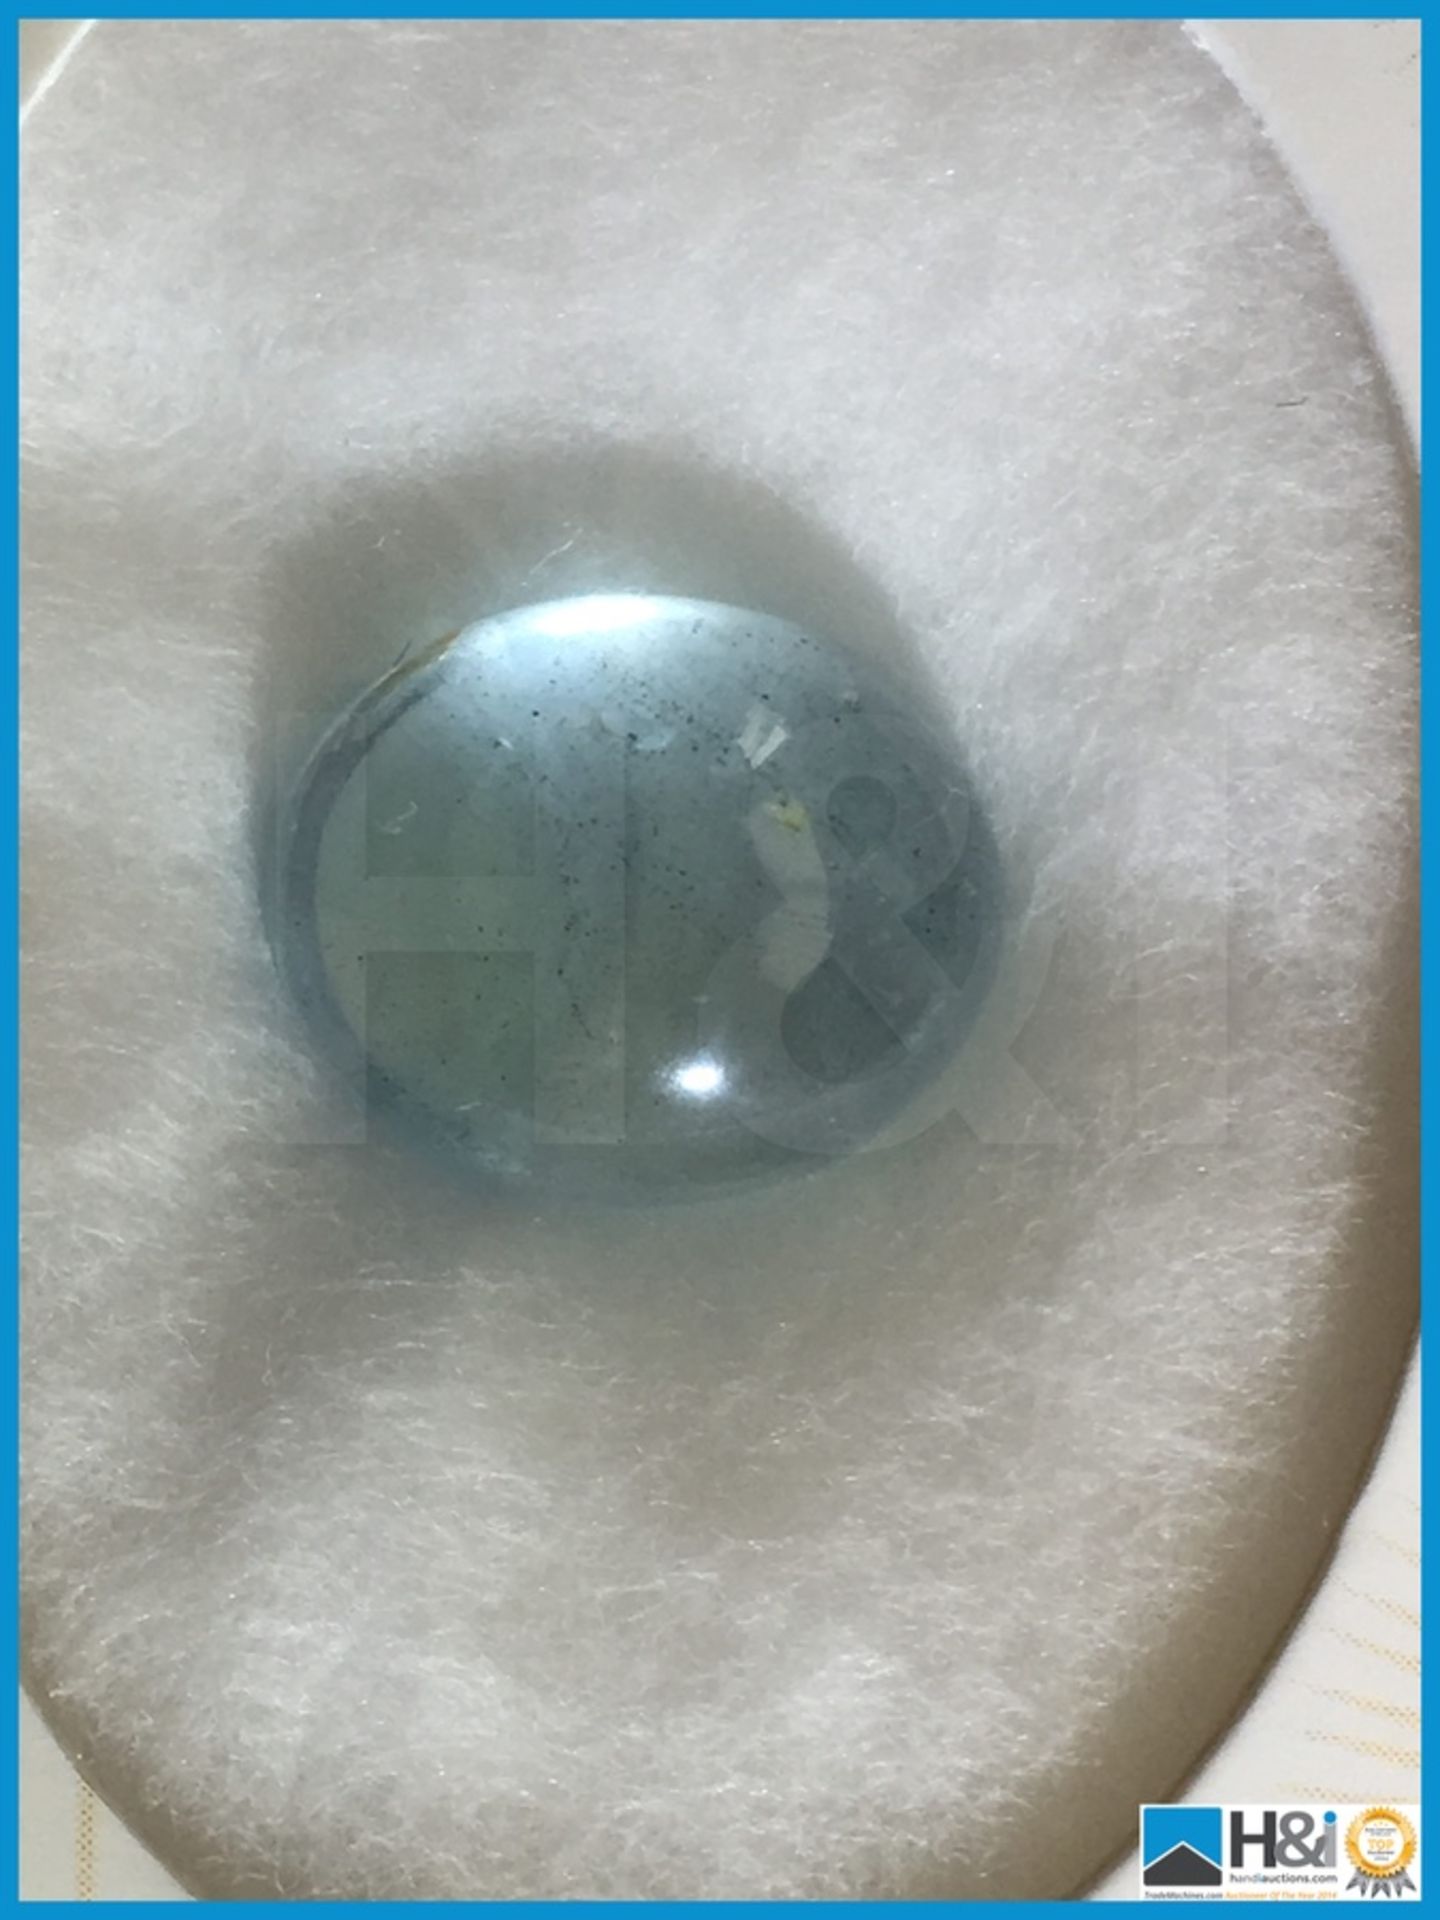 7.70ct Natural Blue Beryl. Oval Cabochon, Transparent 13.65x11.33x6.69mm. Certification: GIL - Image 2 of 3